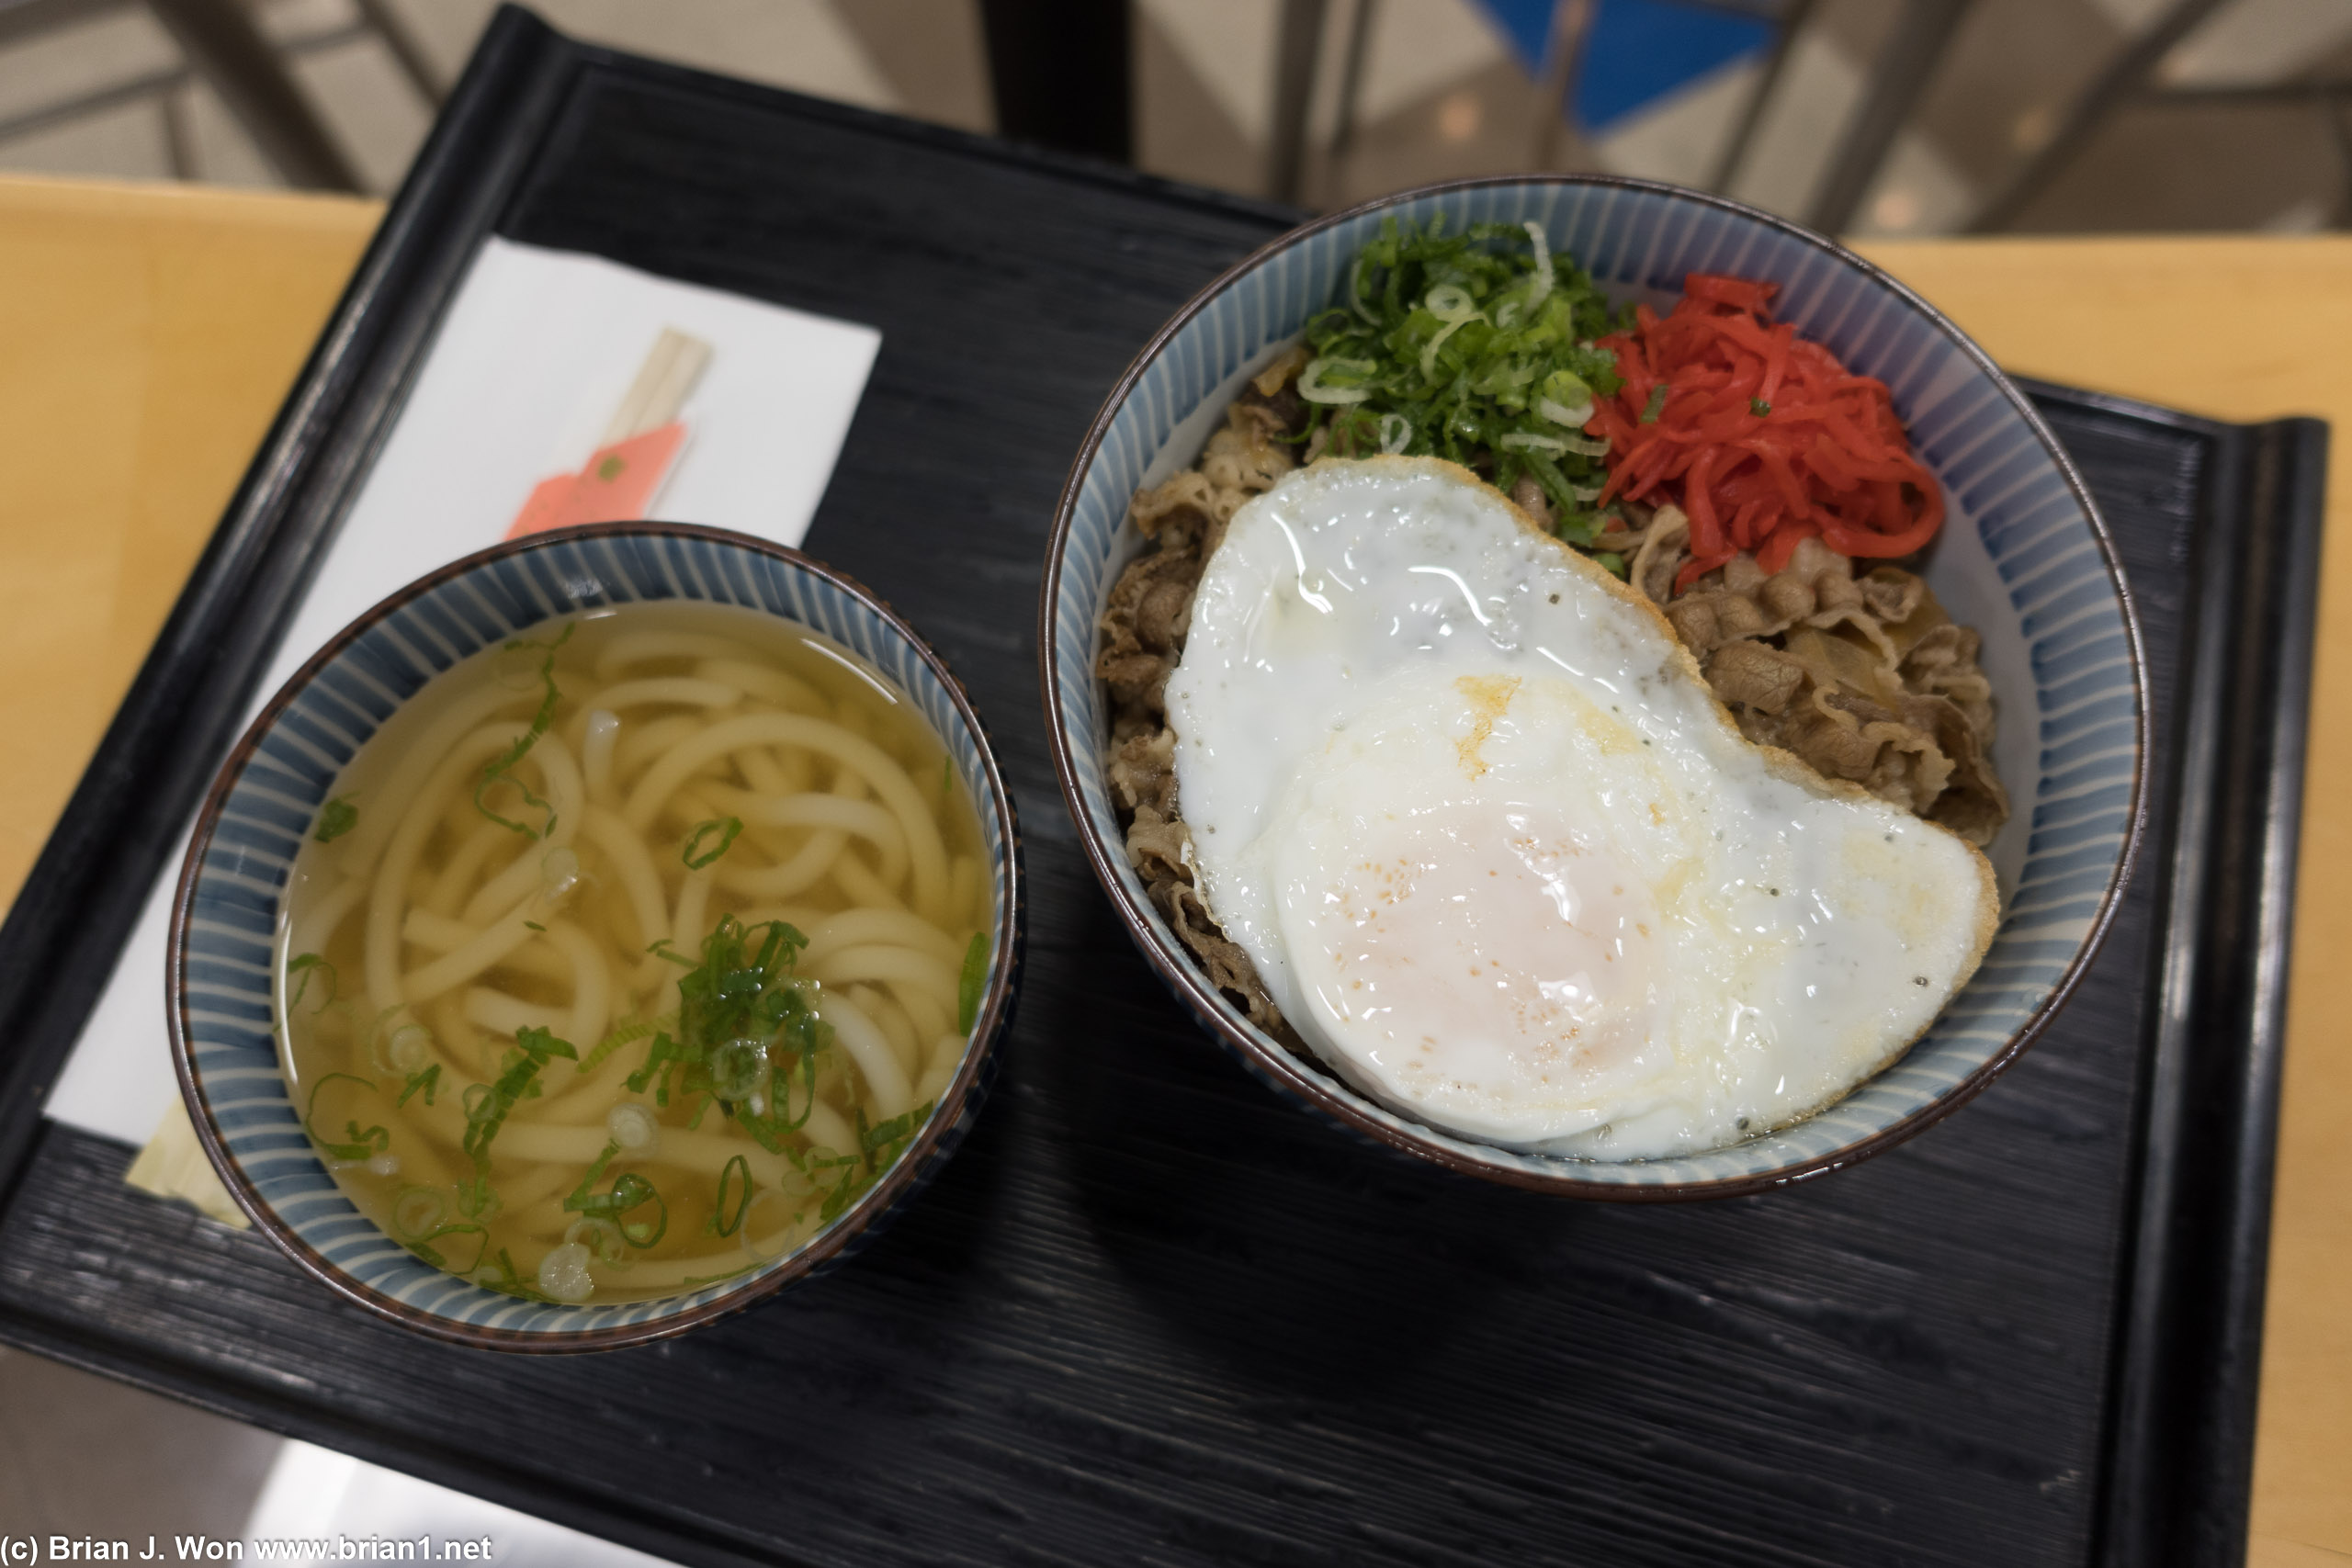 Combo 51: small udon, regular size rice bowl, fried egg.